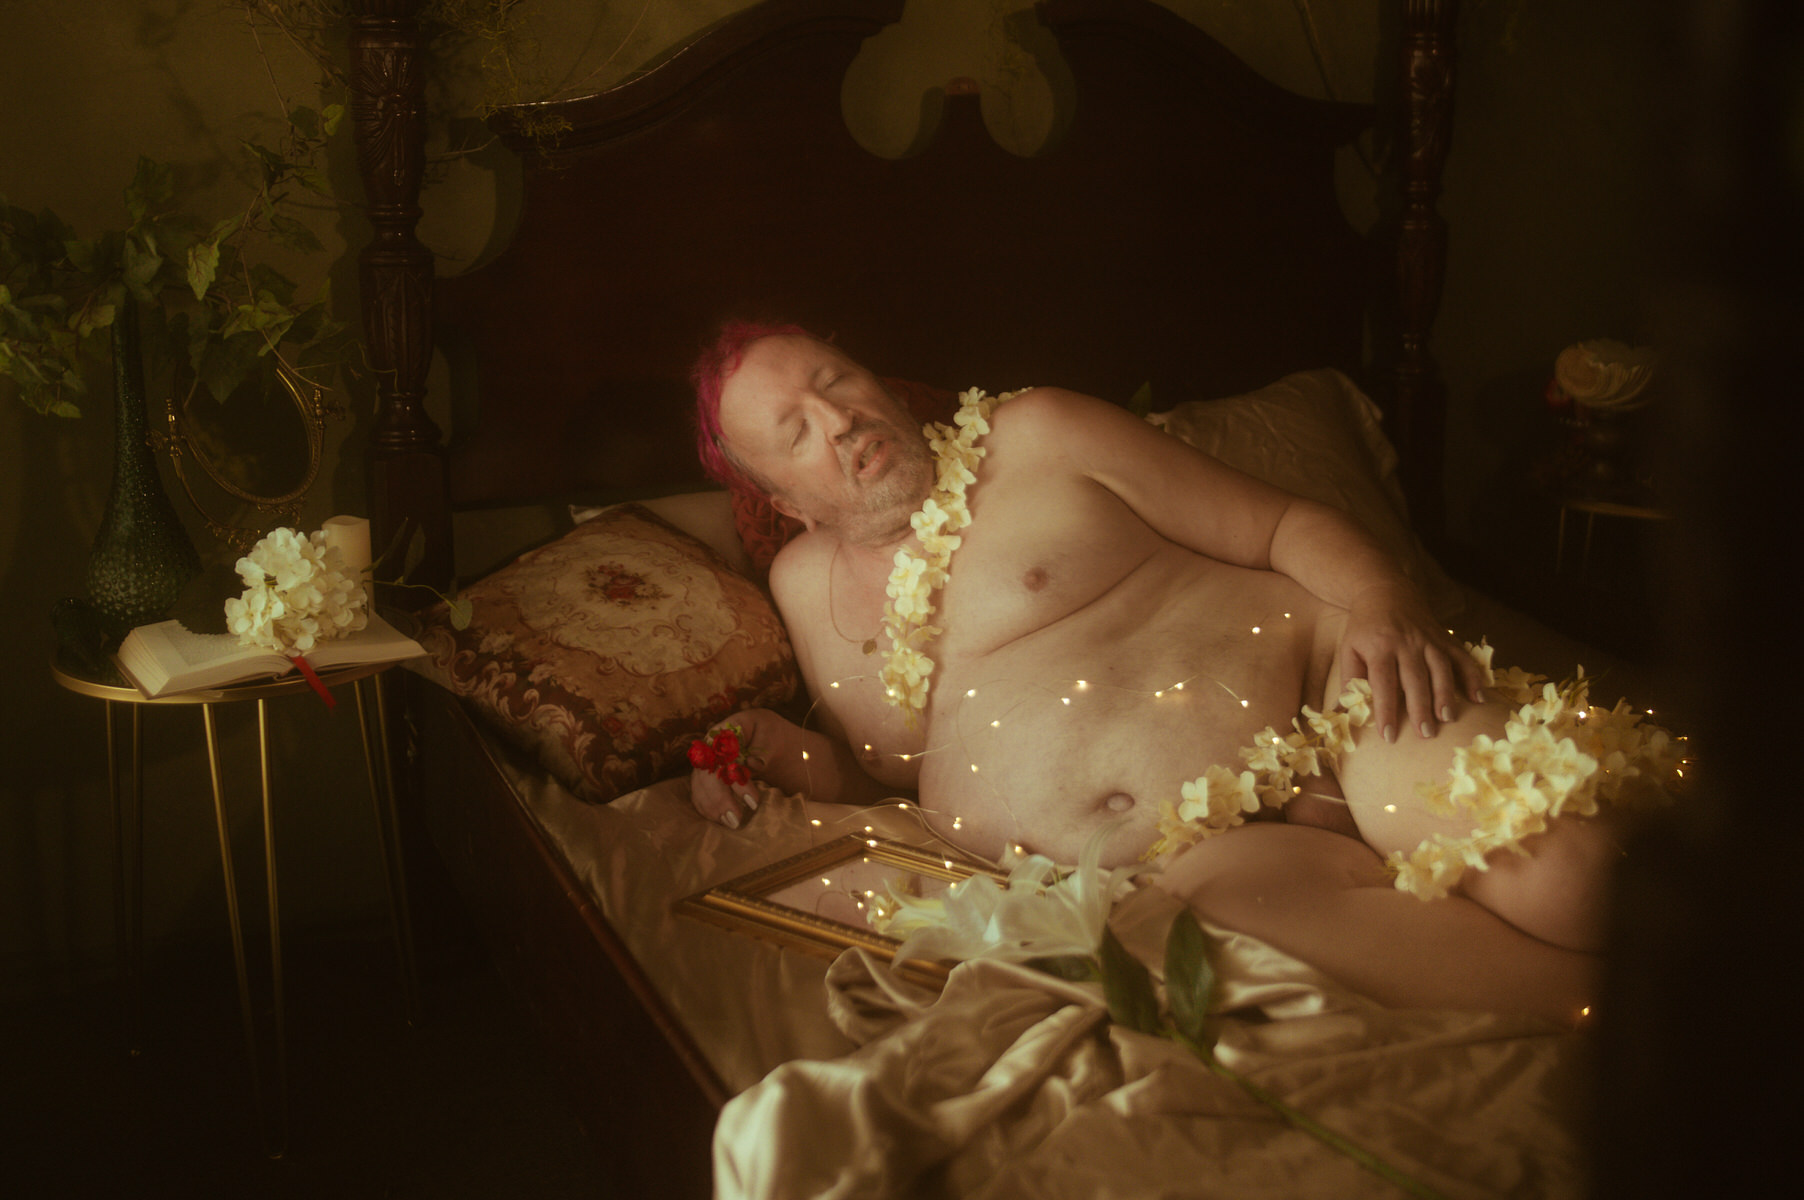 A naked man laying on a bed with flowers, capturing self love through photography.